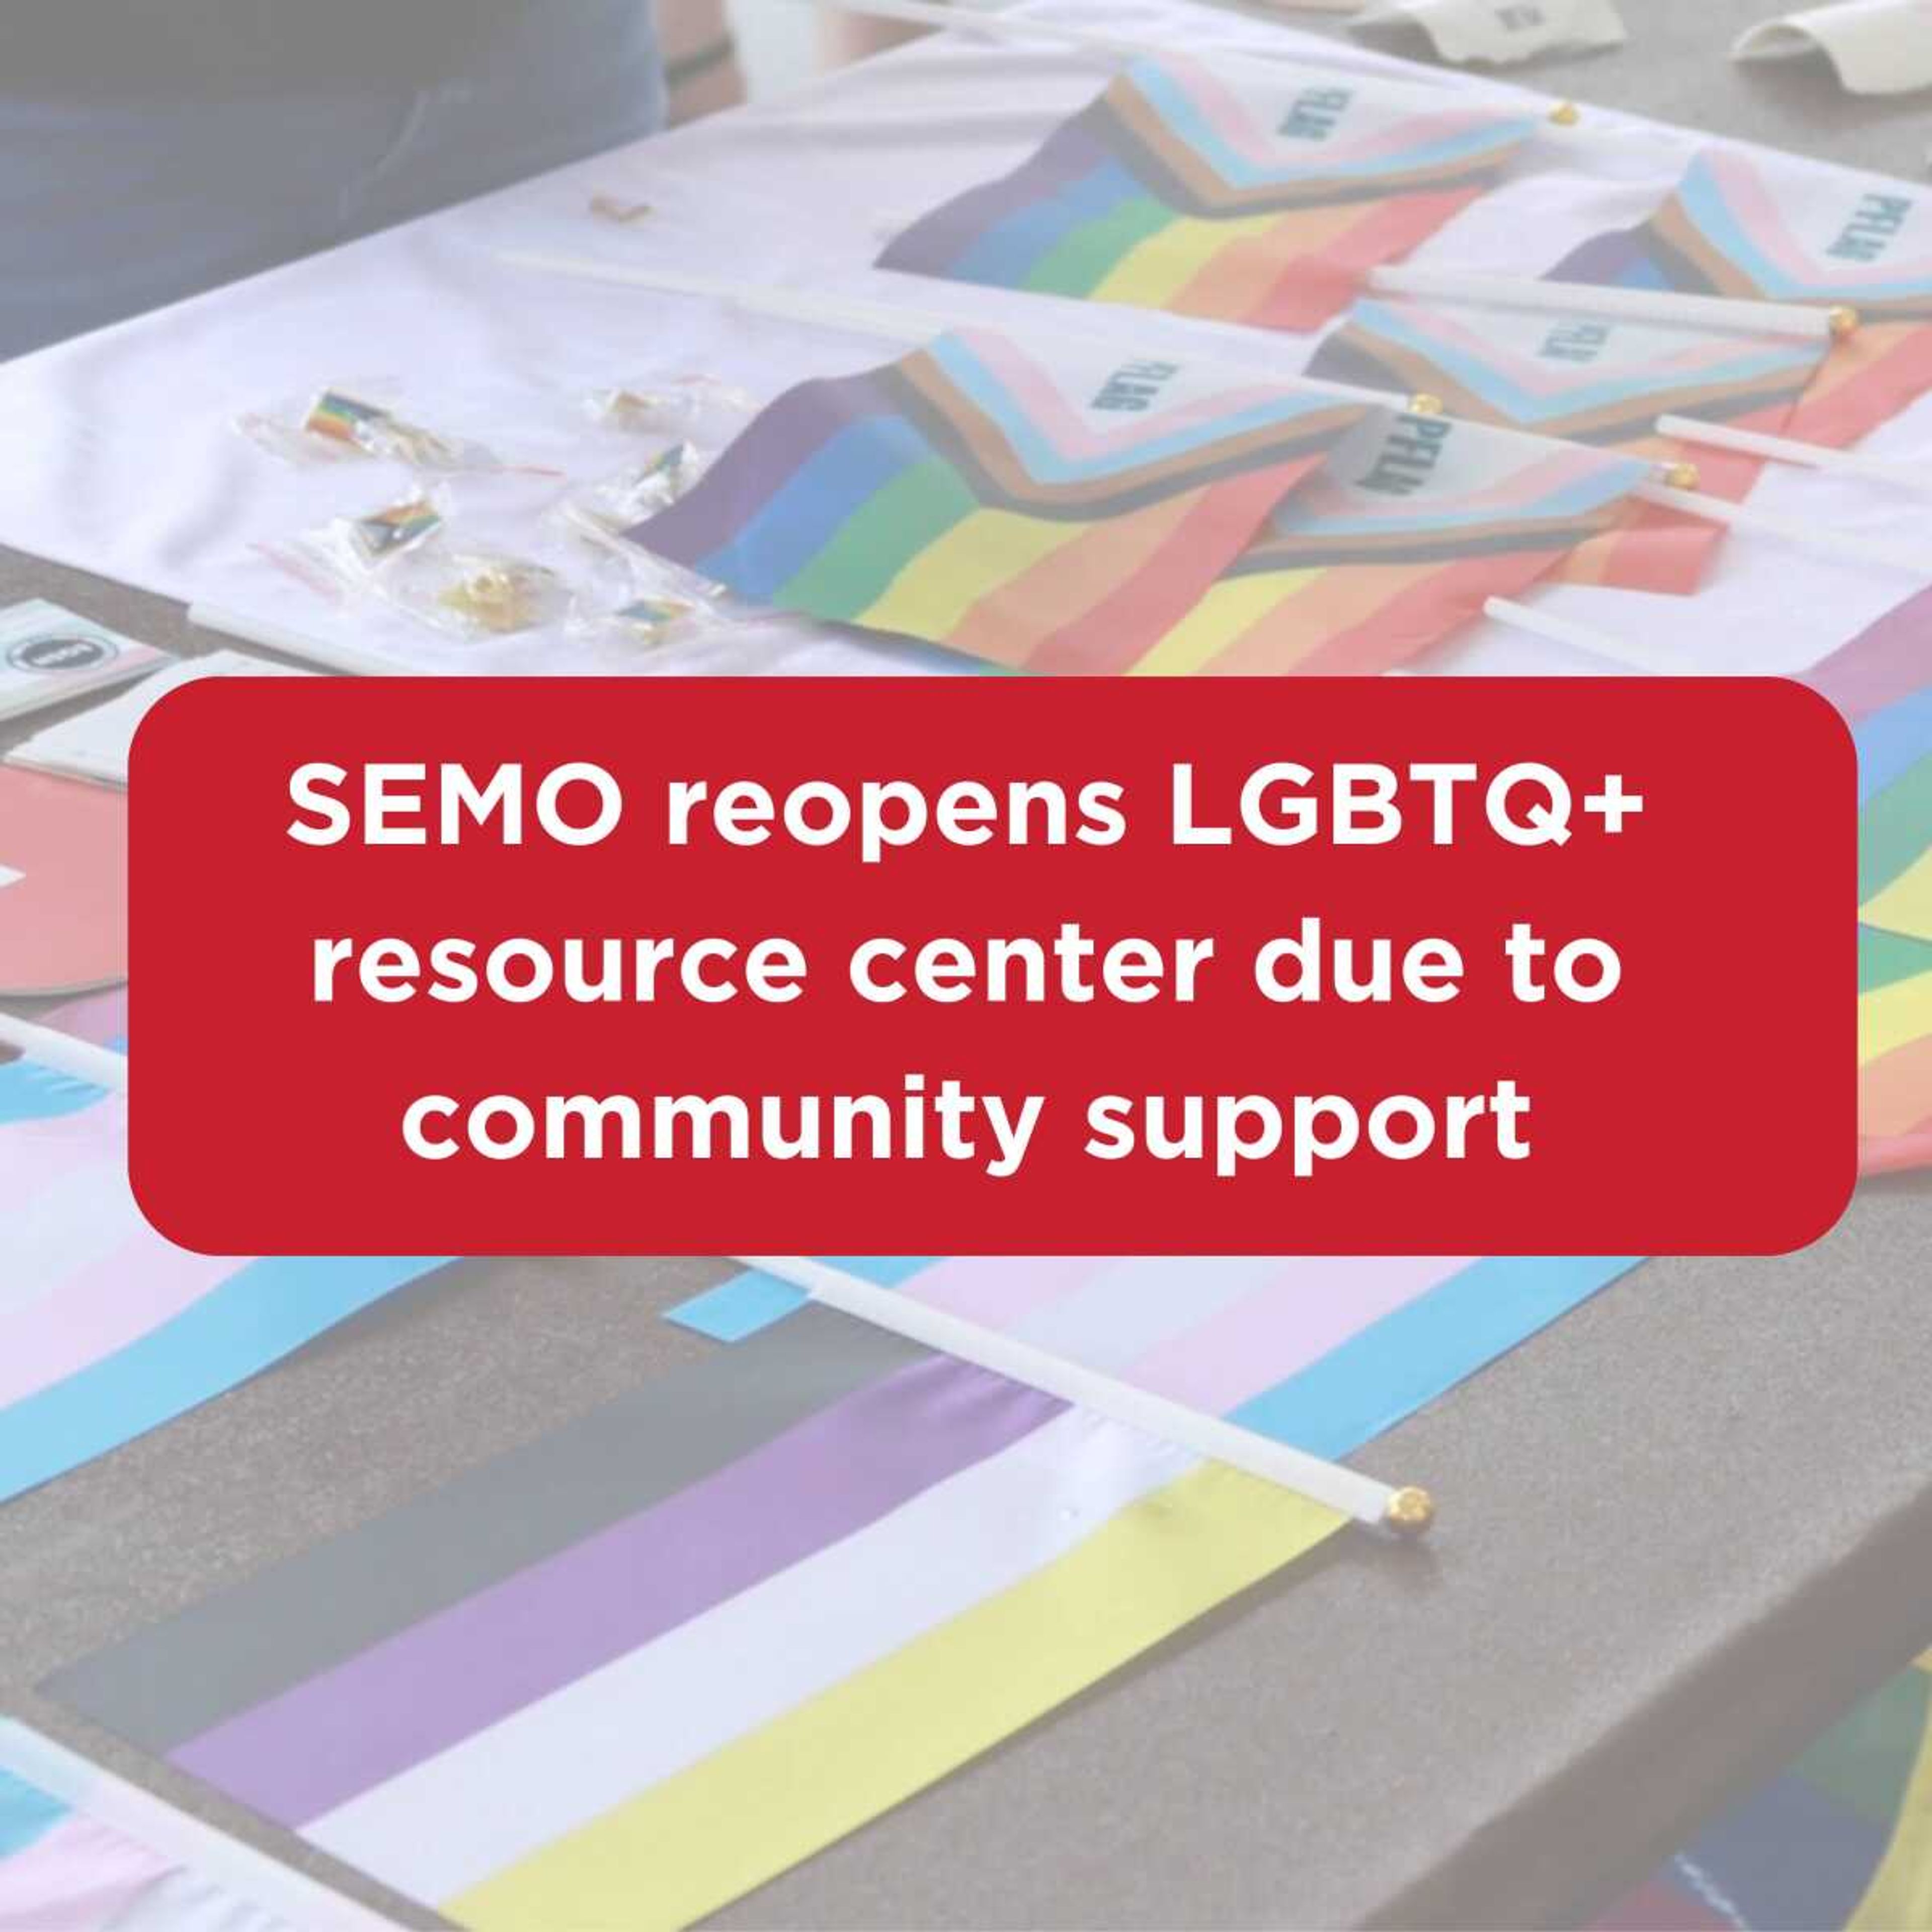 SEMO reopens LGBTQ+ resource center due to community support